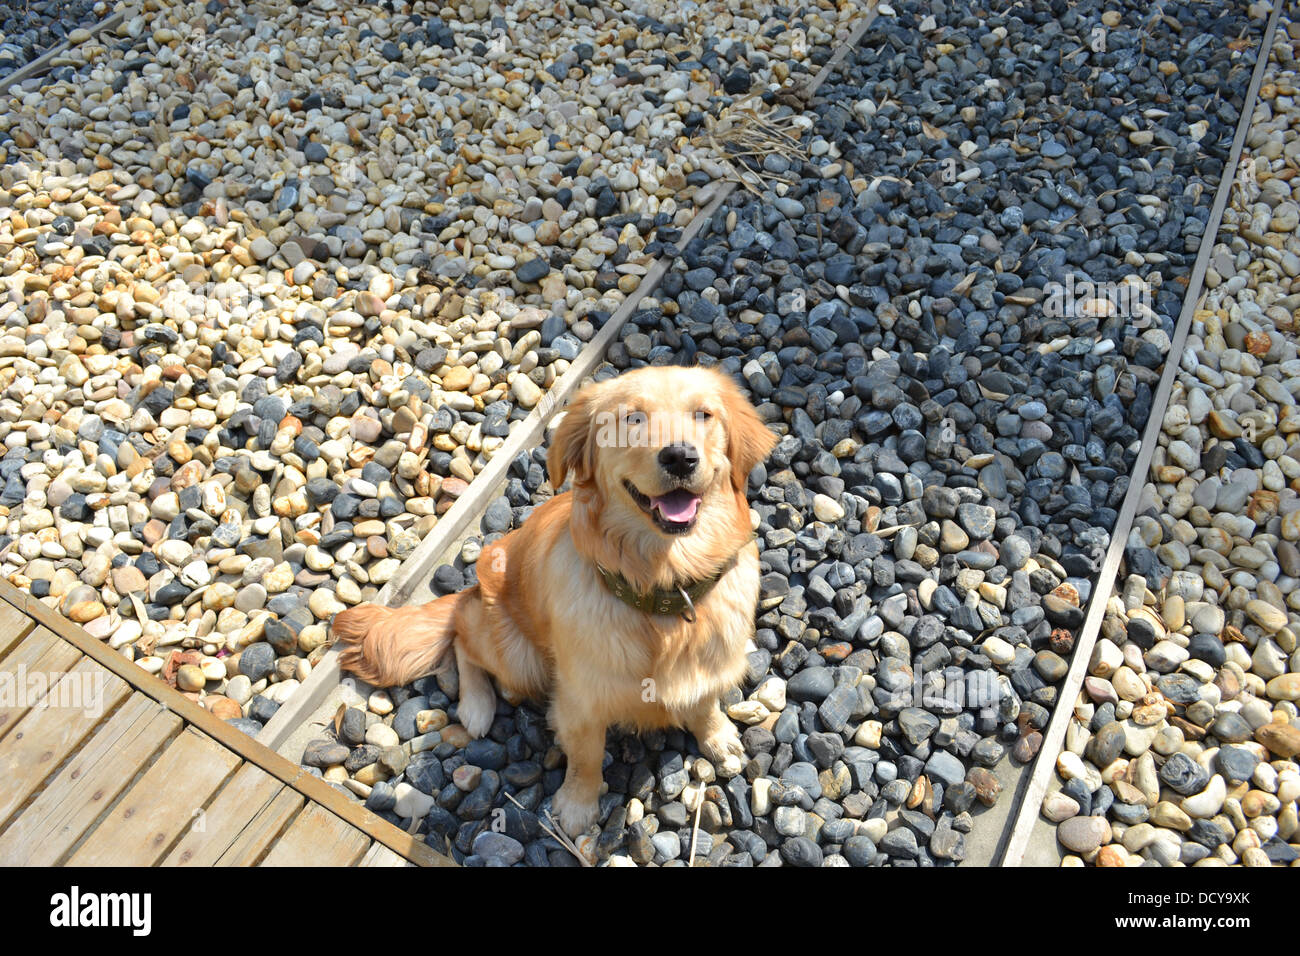 a golden retriever is sitting on cobblestones looking up with a heartwarming and joyful smile Stock Photo